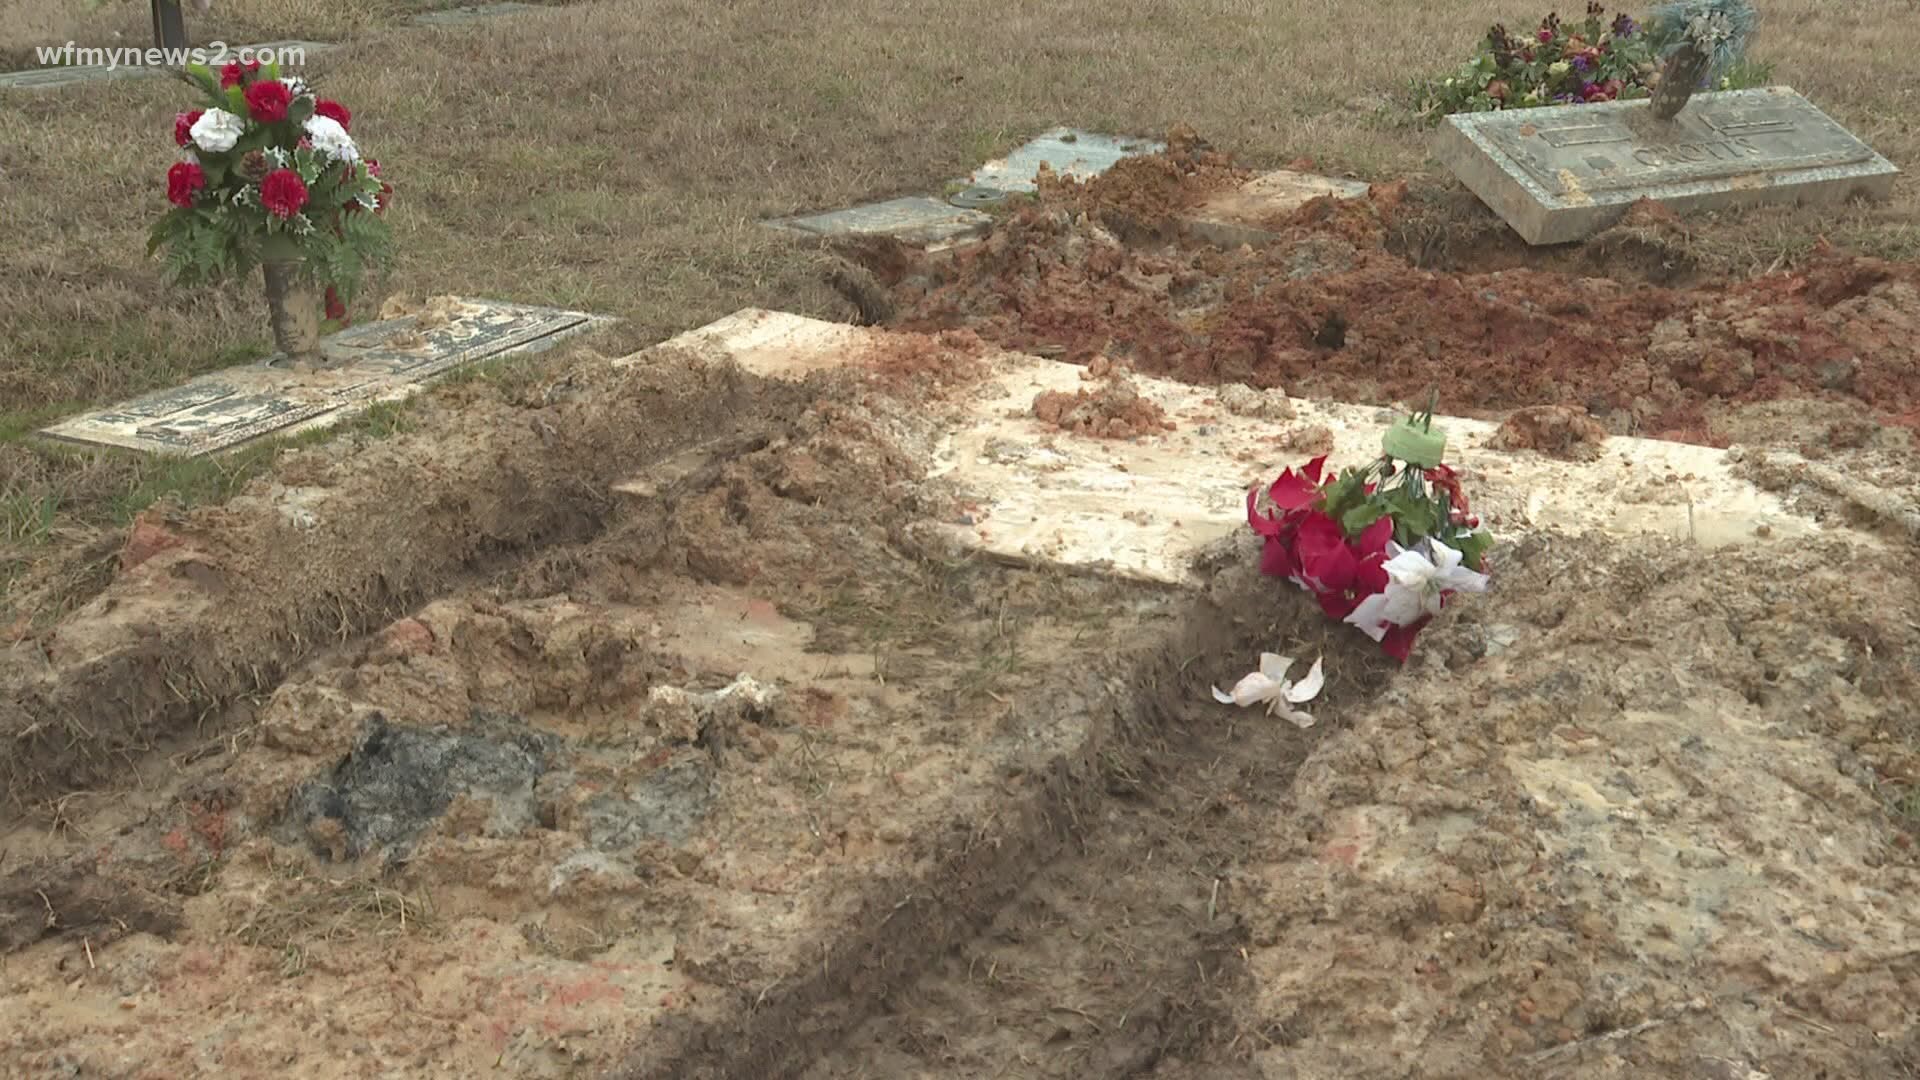 Randolph Memorial Park cemetery will address complaints and issues accusing employees of improperly caring for its grounds.